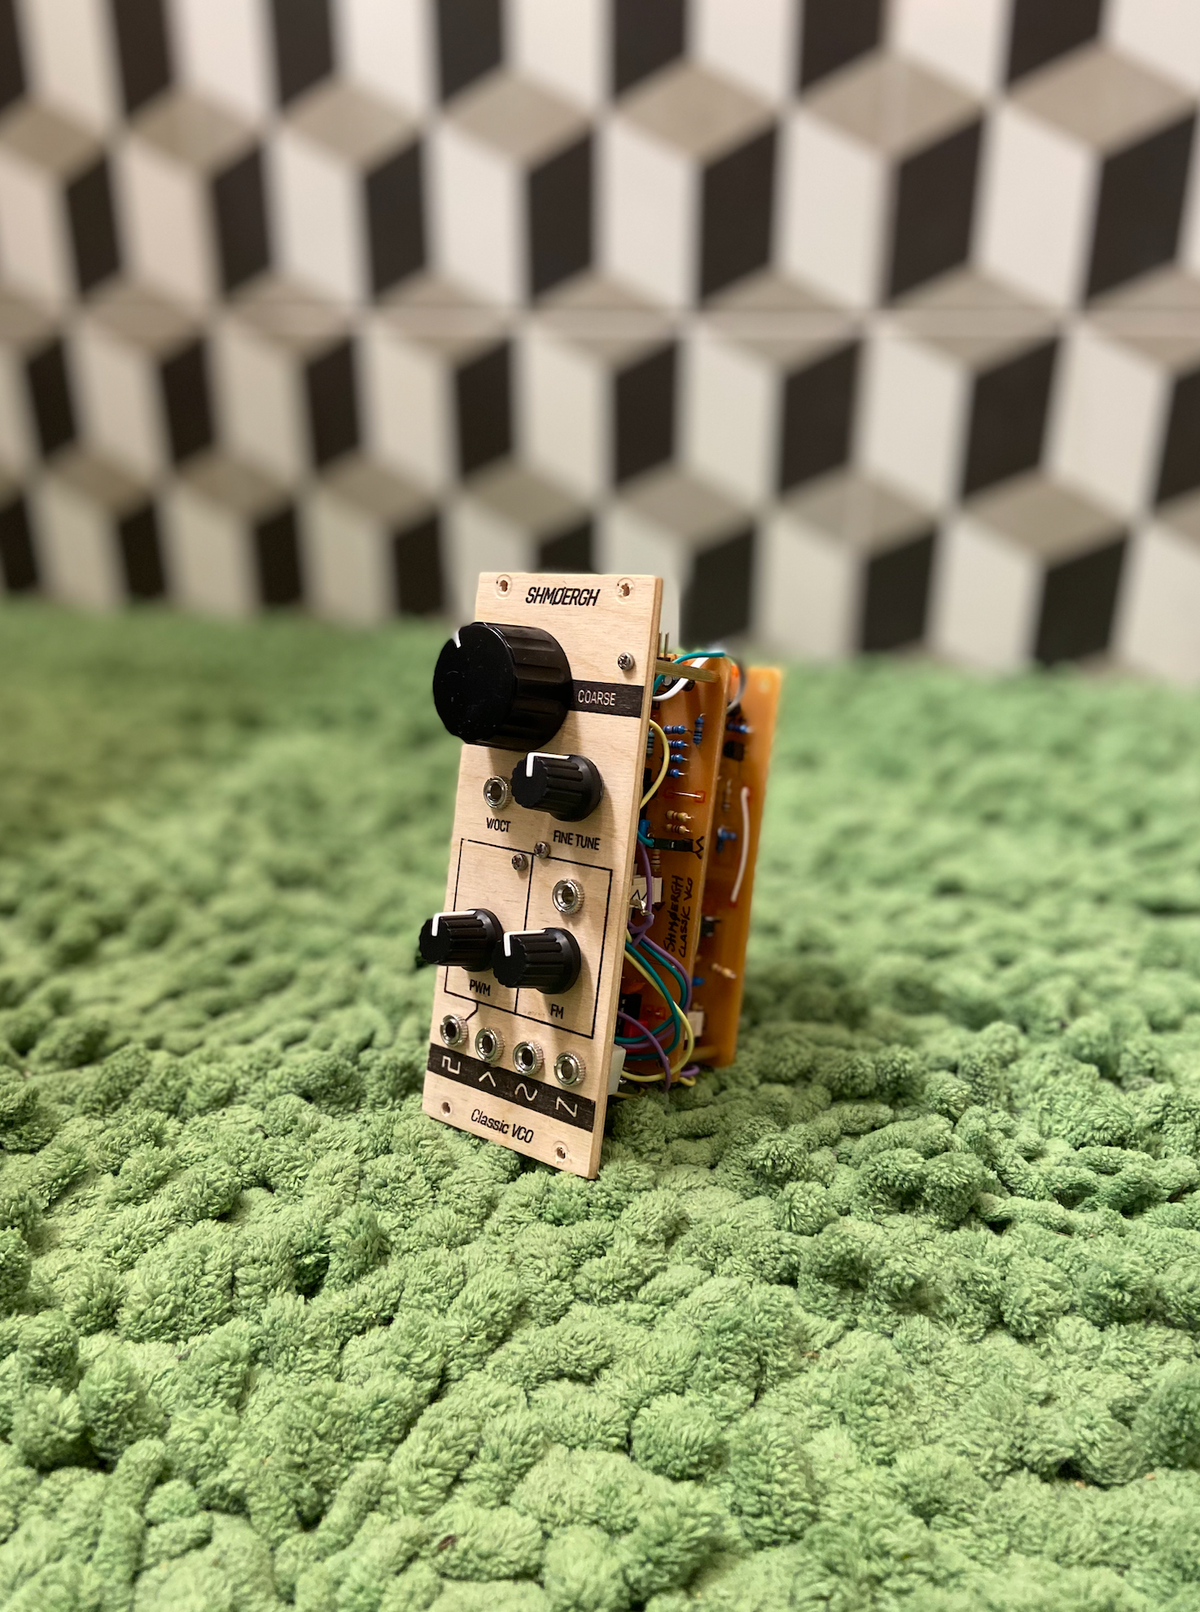 LM358 VCO